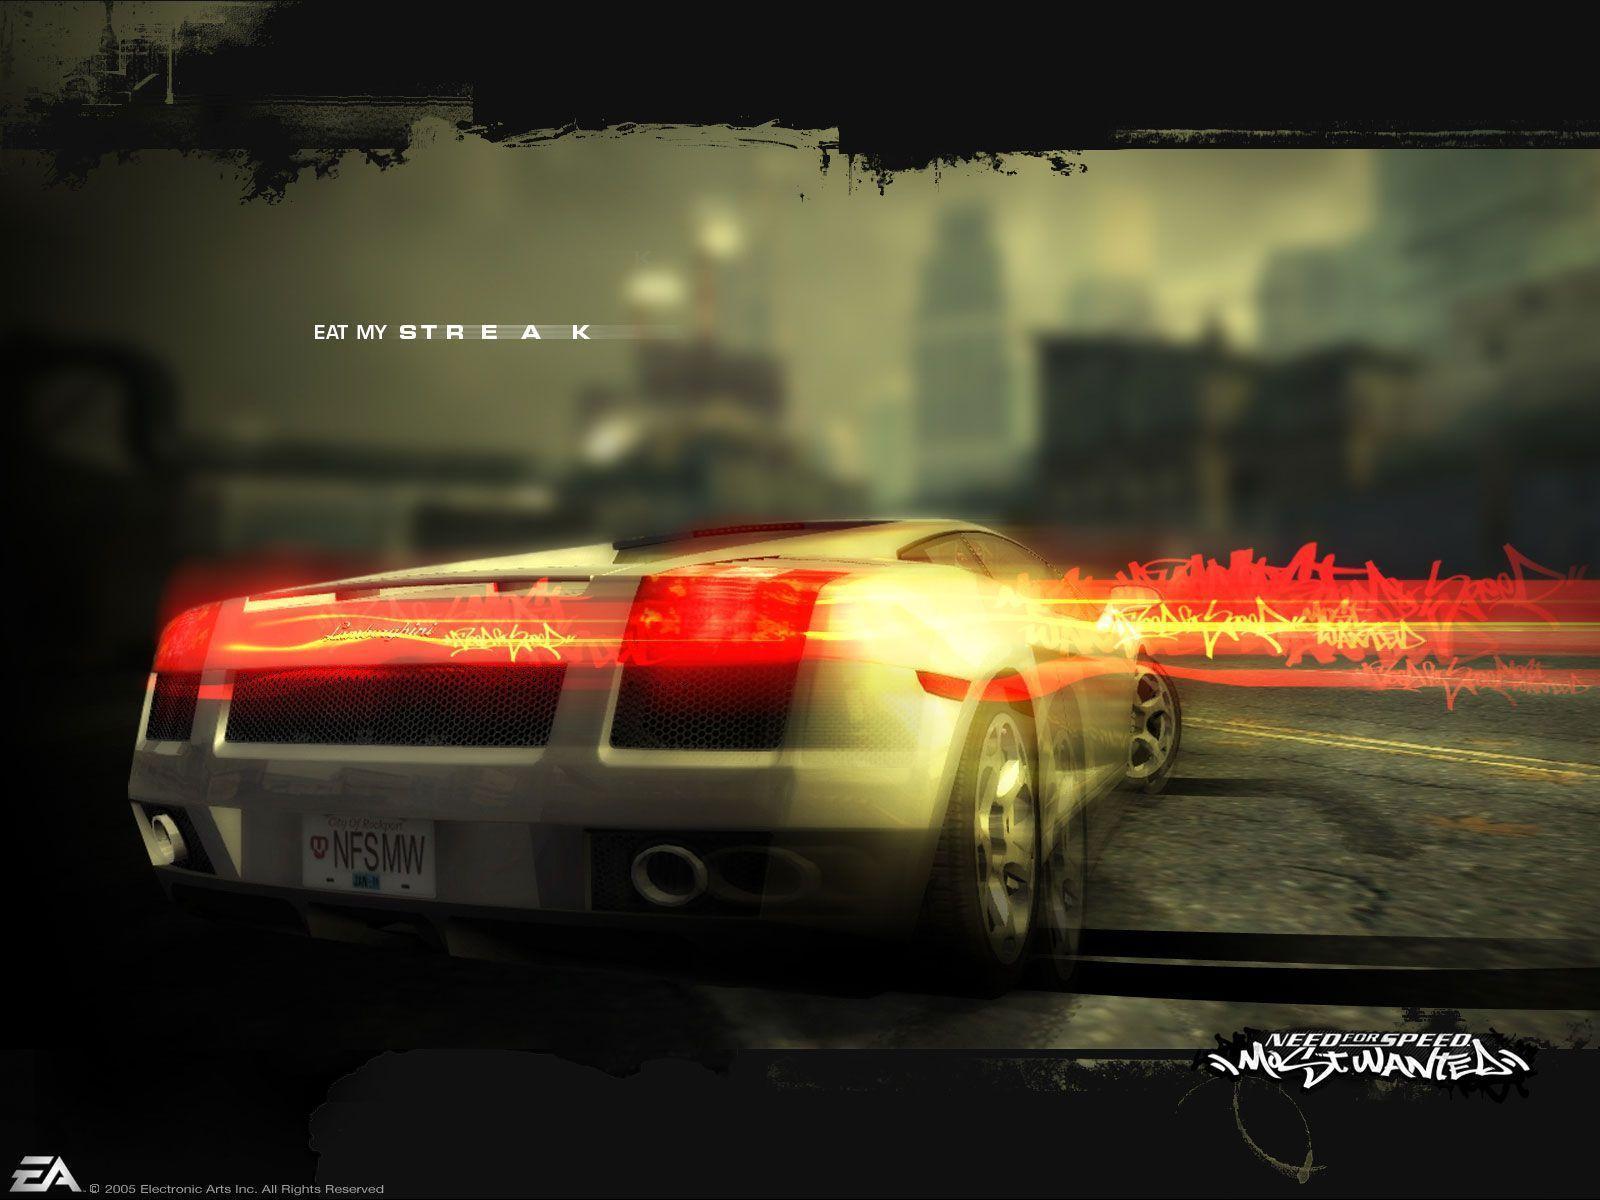 Wallpaper NFS Most Wanted